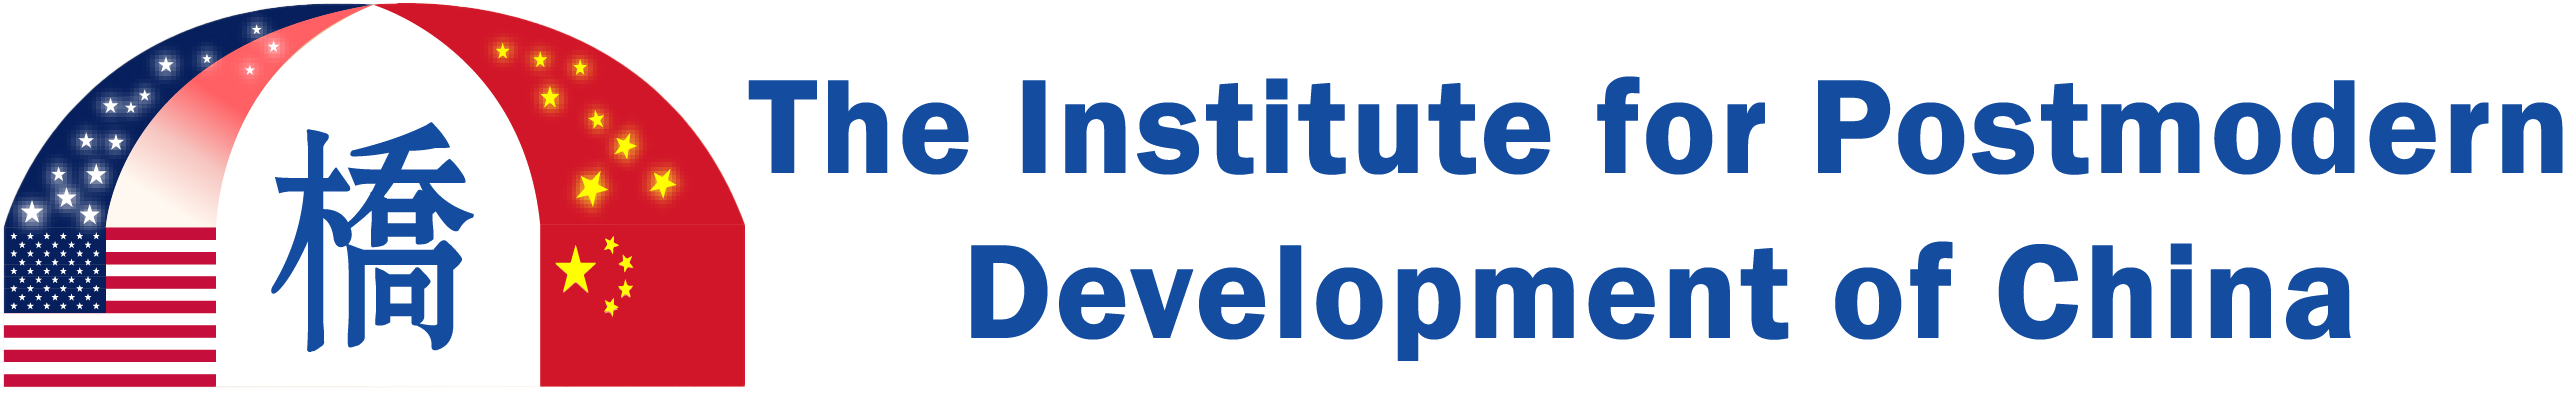 IPDC logo wide - blue text